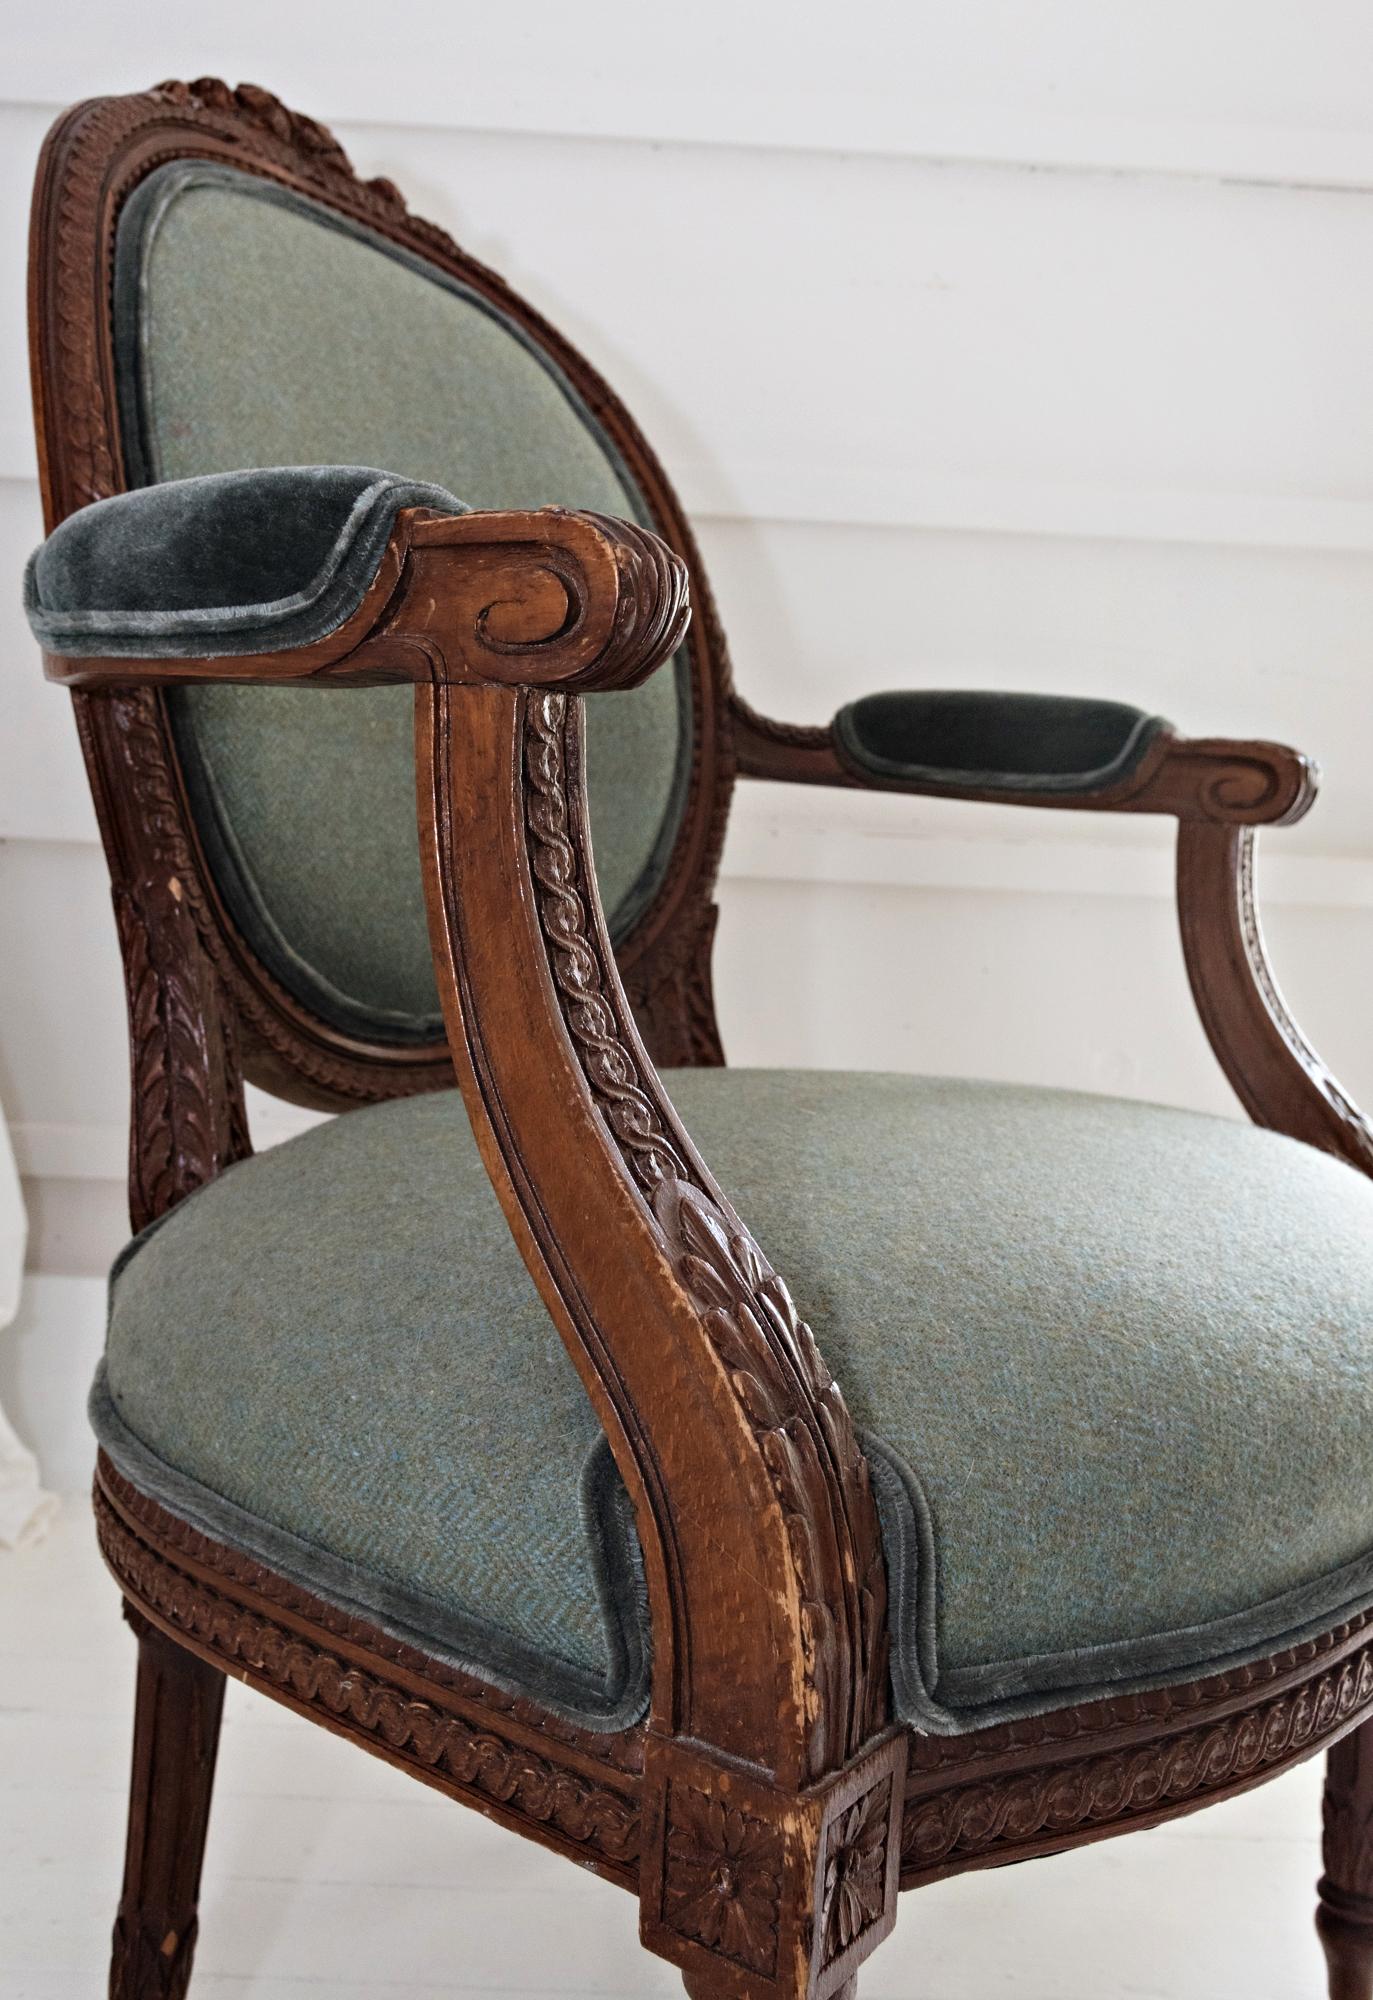 Gorgeous carved walnut Louis XVI fauteuil covered in Ralph Lauren teal tweed with contrasting teal mohair. The Louis XVI style having an oval padded
back surmounted by a carved bow motif, joined by padded outscrolled arms
to the padded seat,